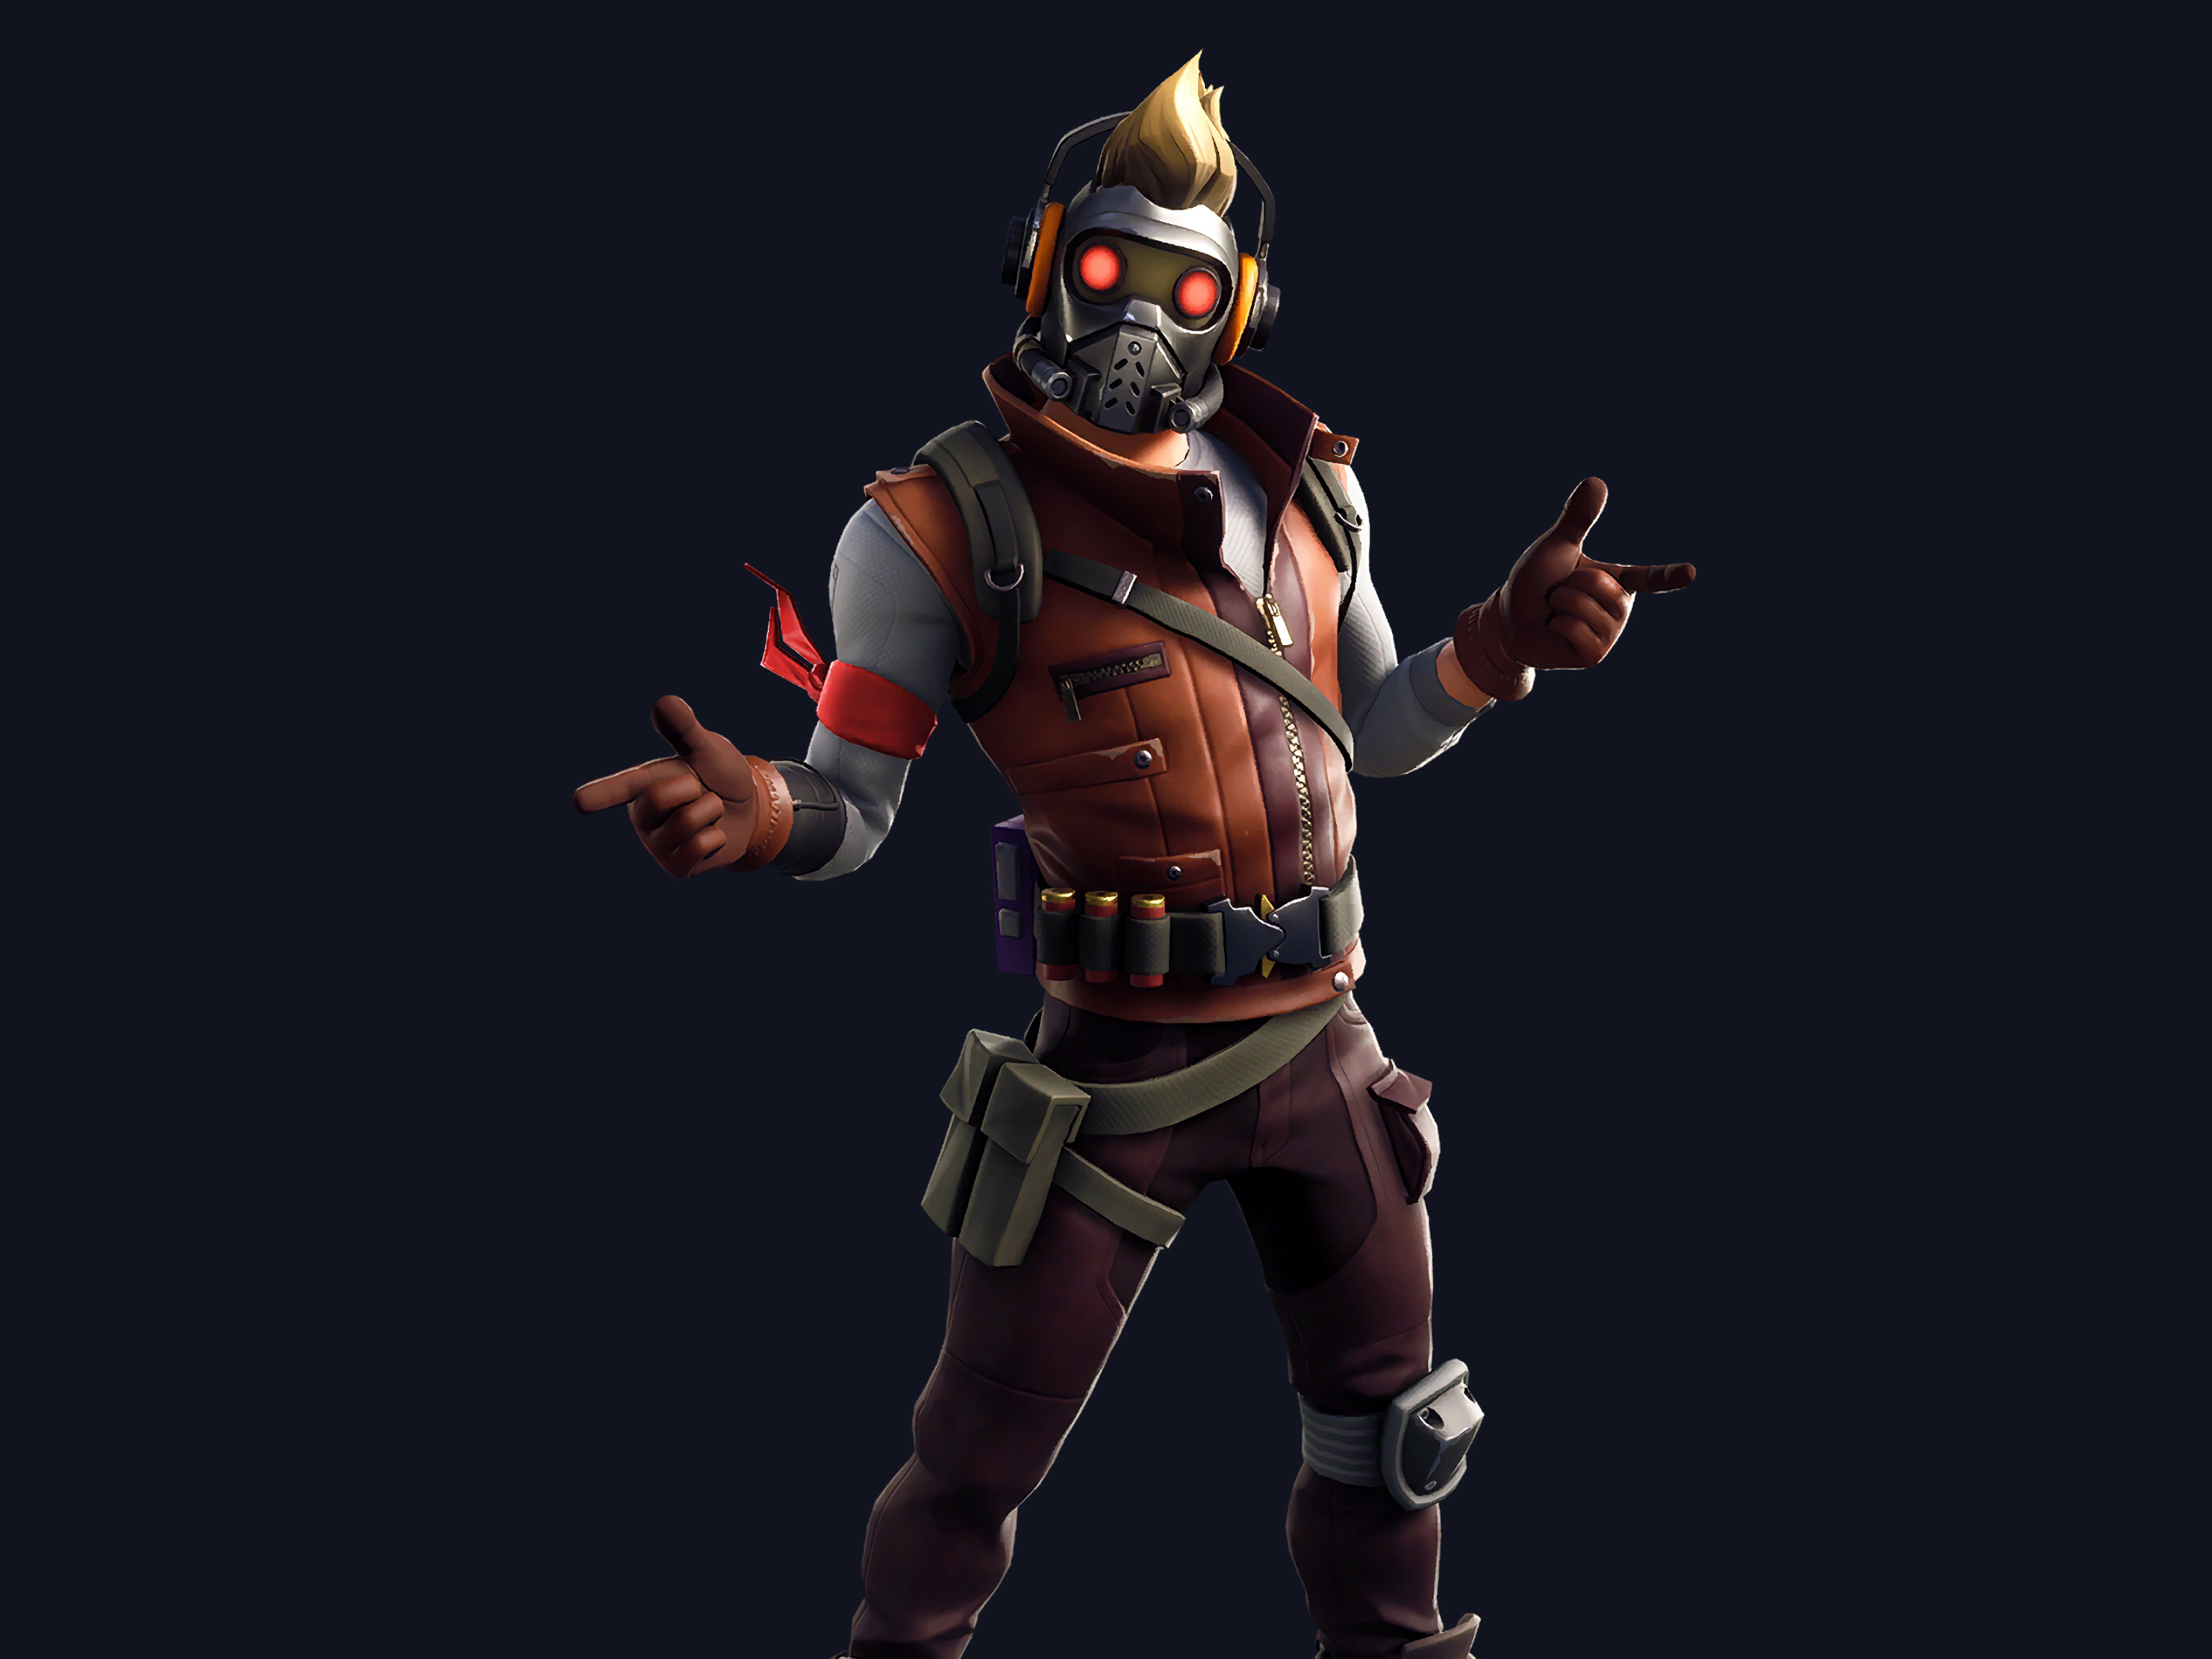 3200x2400 Resolution Star Lord Outfit Skin Fortnite Avengers 3200x2400 ...